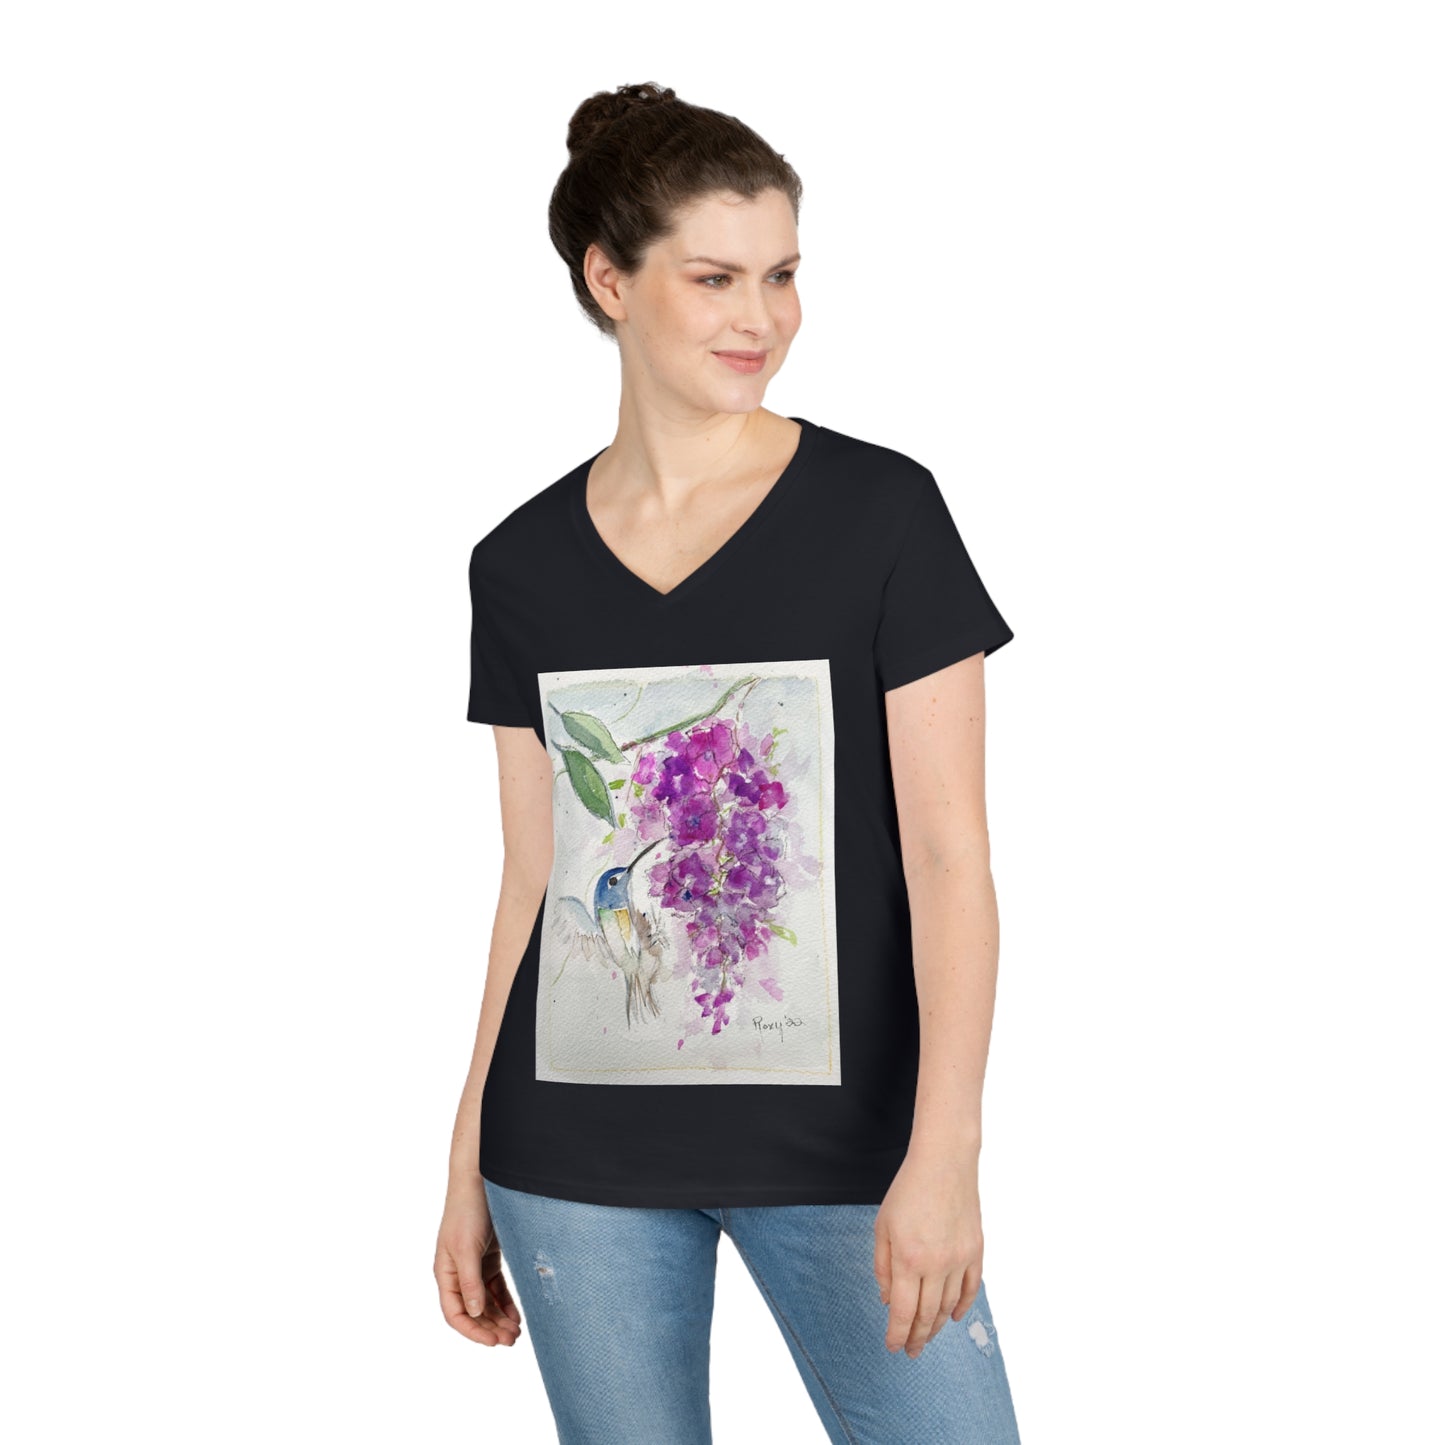 Floaty Hummingbird in Pink Wisteria Ladies' V-Neck T-Shirt